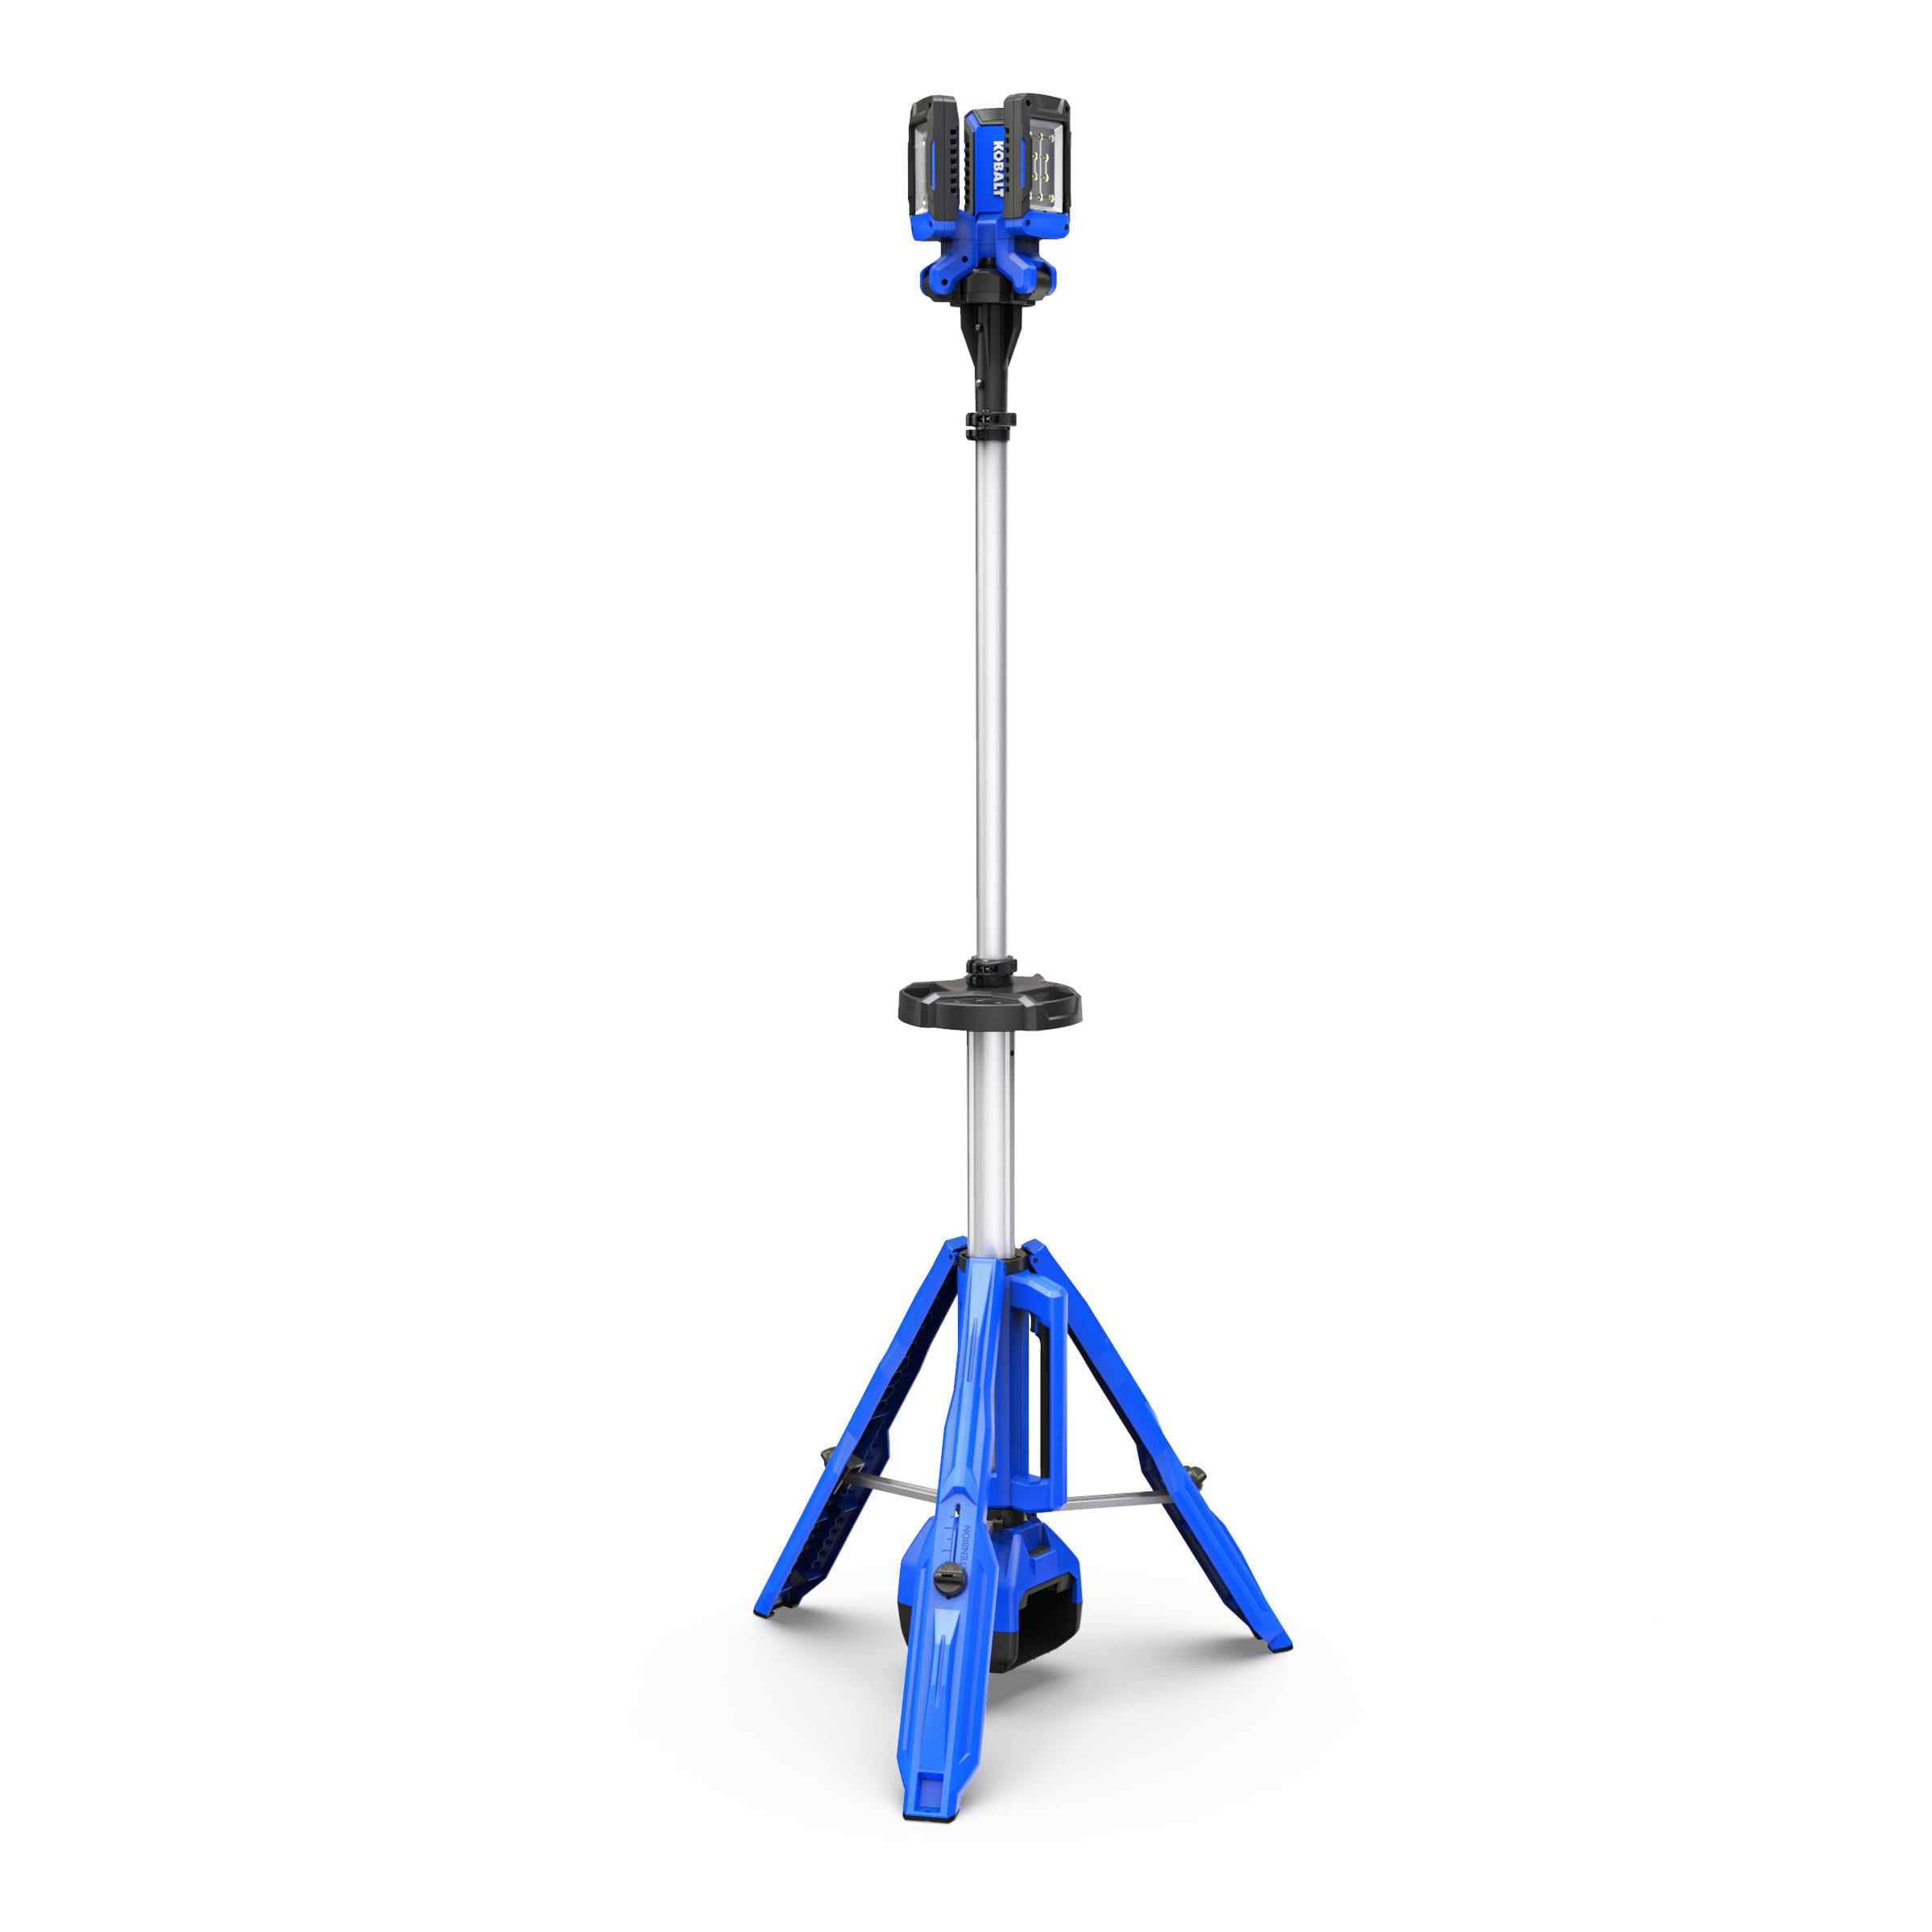 Kobalt LED Rechargeable Stand Work Light in Blue | KTL 124B-03 $99 at Lowes